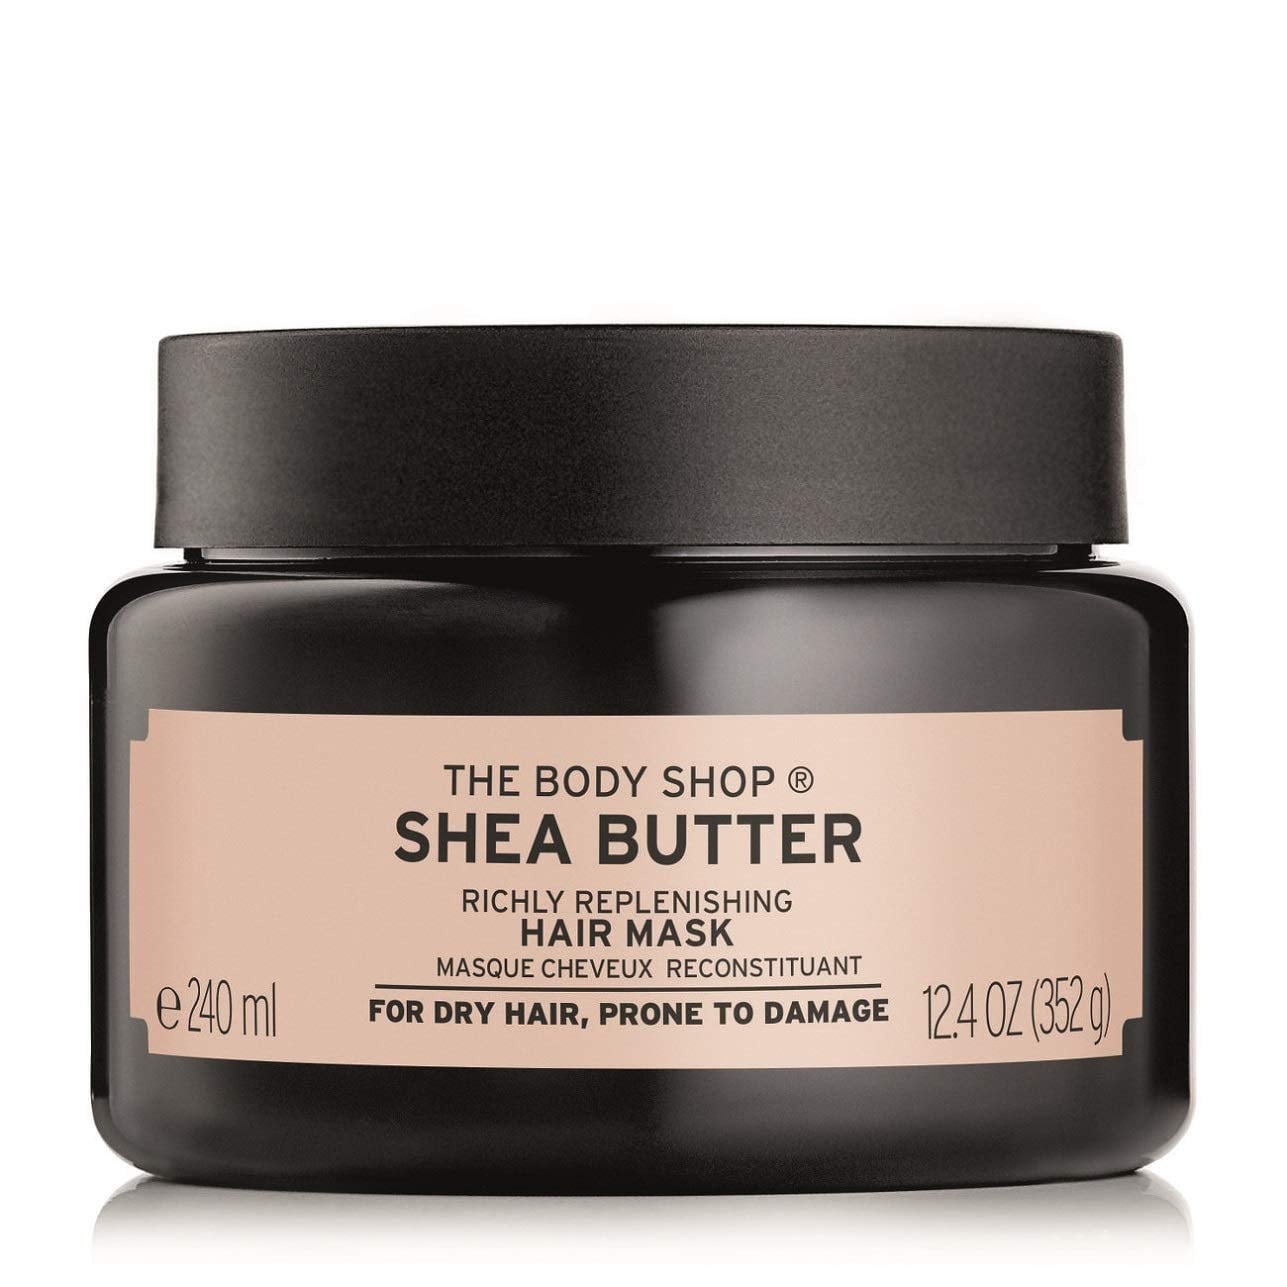 Best Hair Mask For Dry, Damaged Hair: The Body Shop Shea Butter Hair Mask |  We Rounded Up the Best Hair Masks and Conditioning Treatments by Hair Type  | POPSUGAR Beauty Photo 9